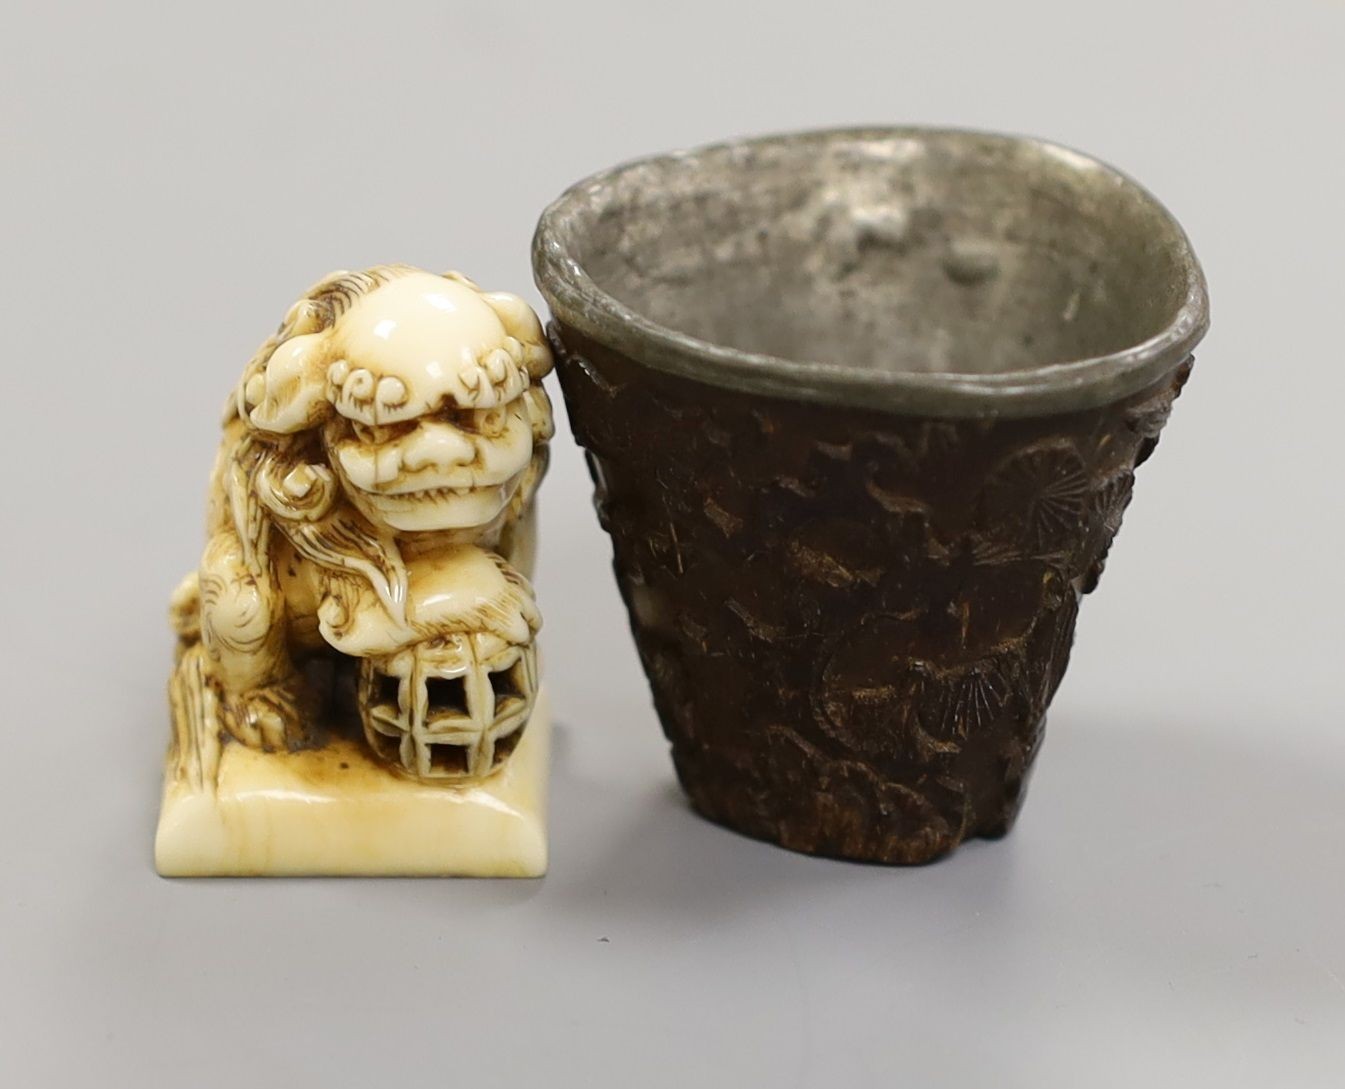 A Chinese or Japanese ivory lion dog 18th/19th century and a Chinese carved nut cup, 19th century. 4cm